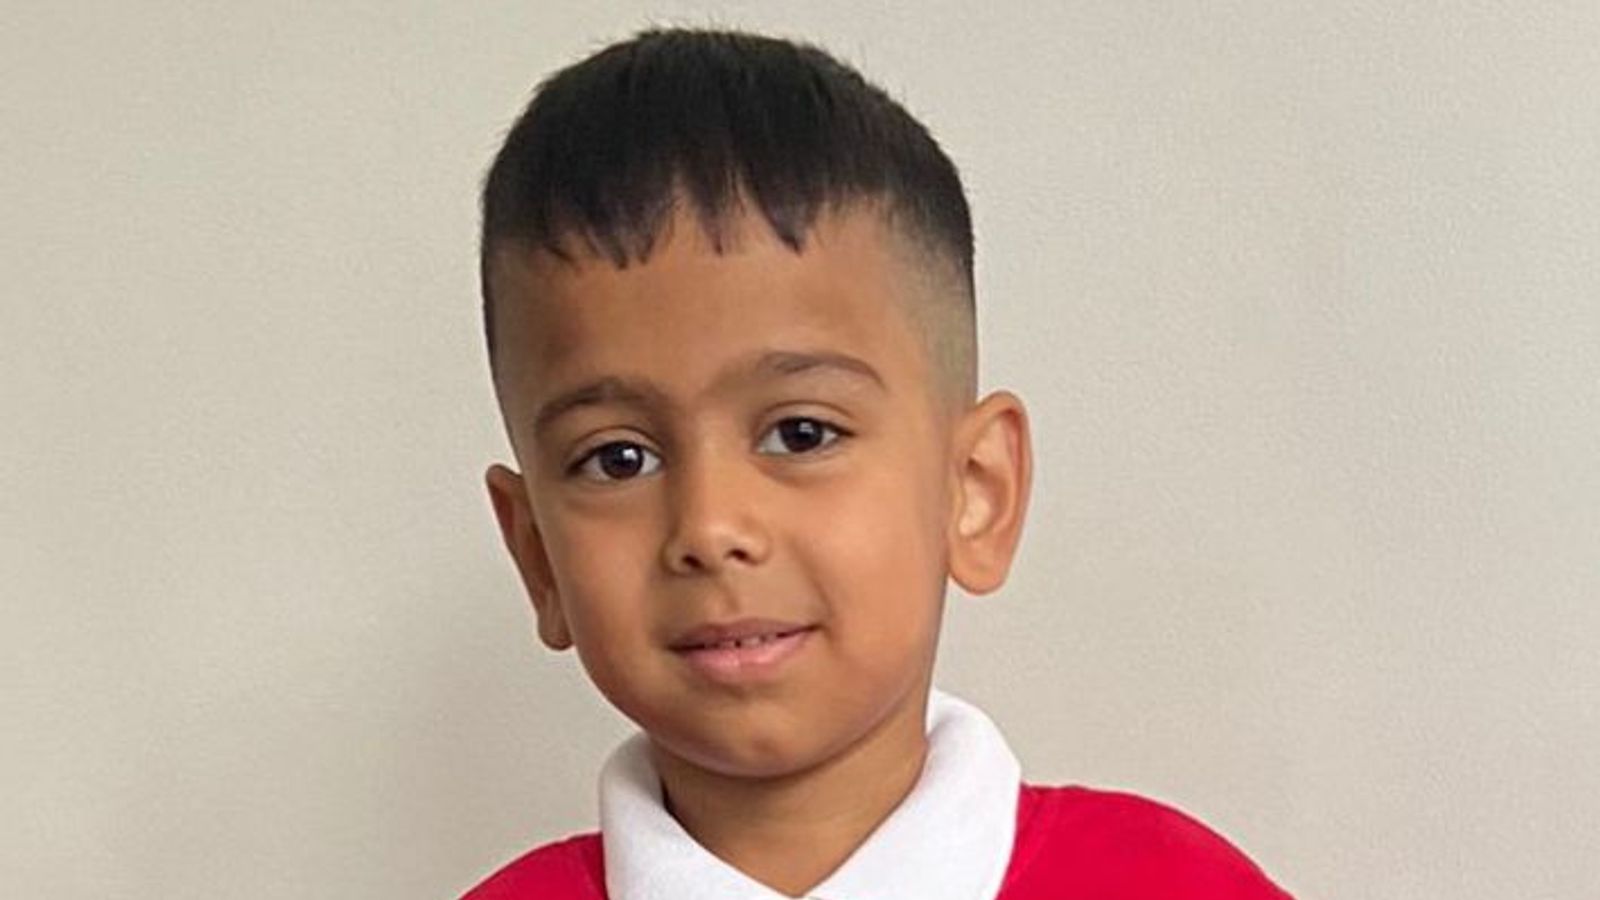 Family of Yusuf Mahmud Nazir, 5, who died after he was sent home from hospital not satisfied with investigation